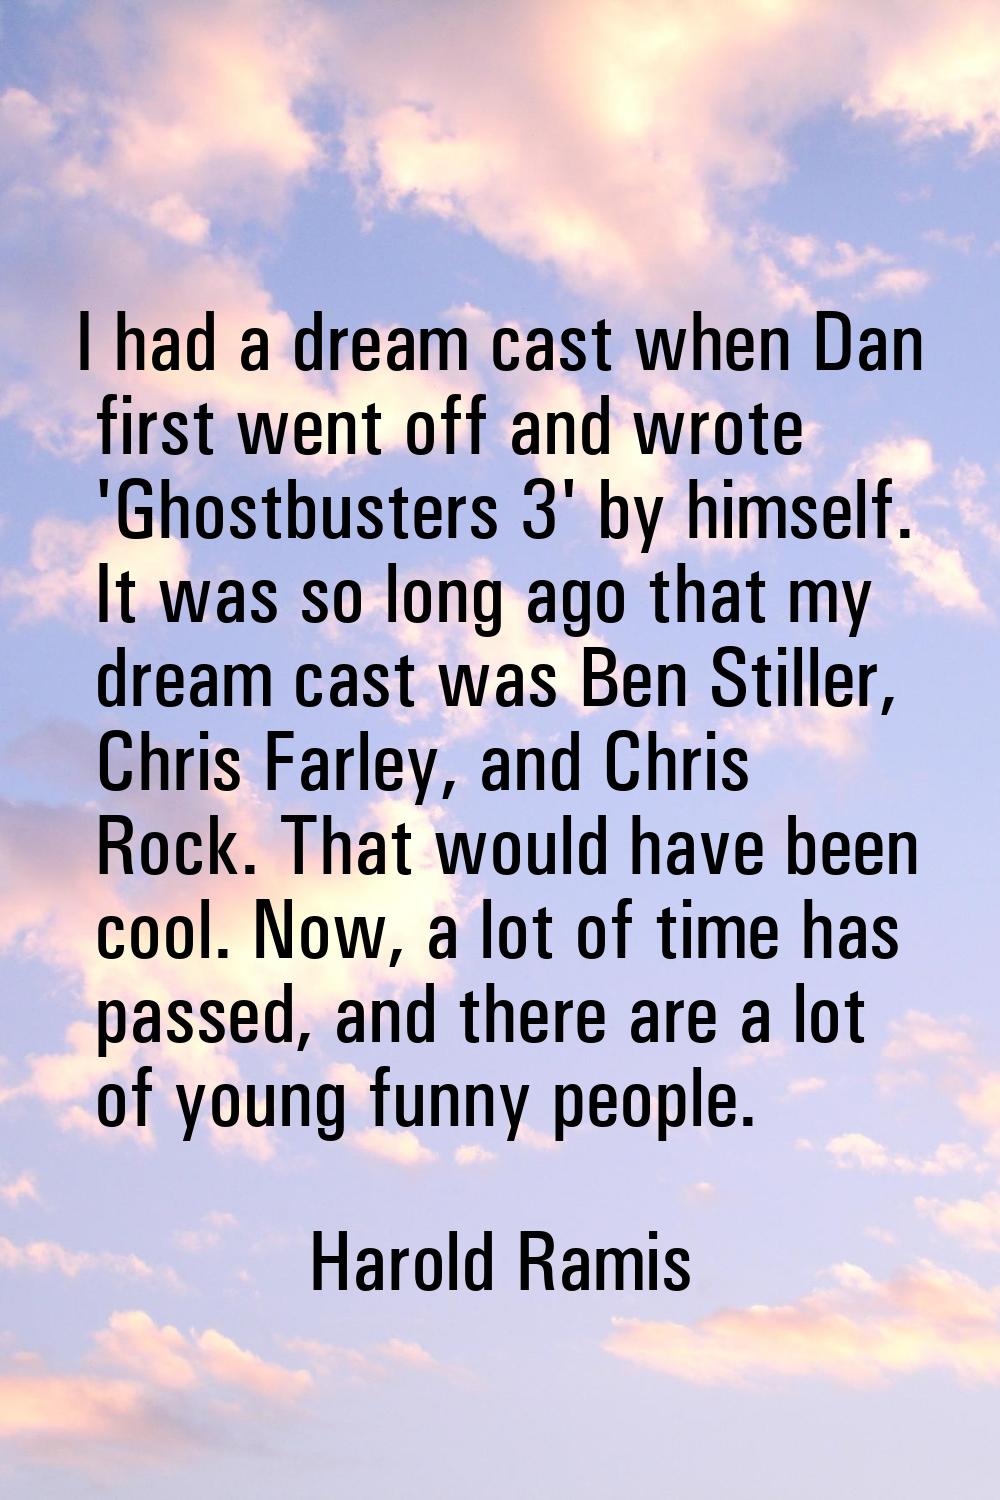 I had a dream cast when Dan first went off and wrote 'Ghostbusters 3' by himself. It was so long ag